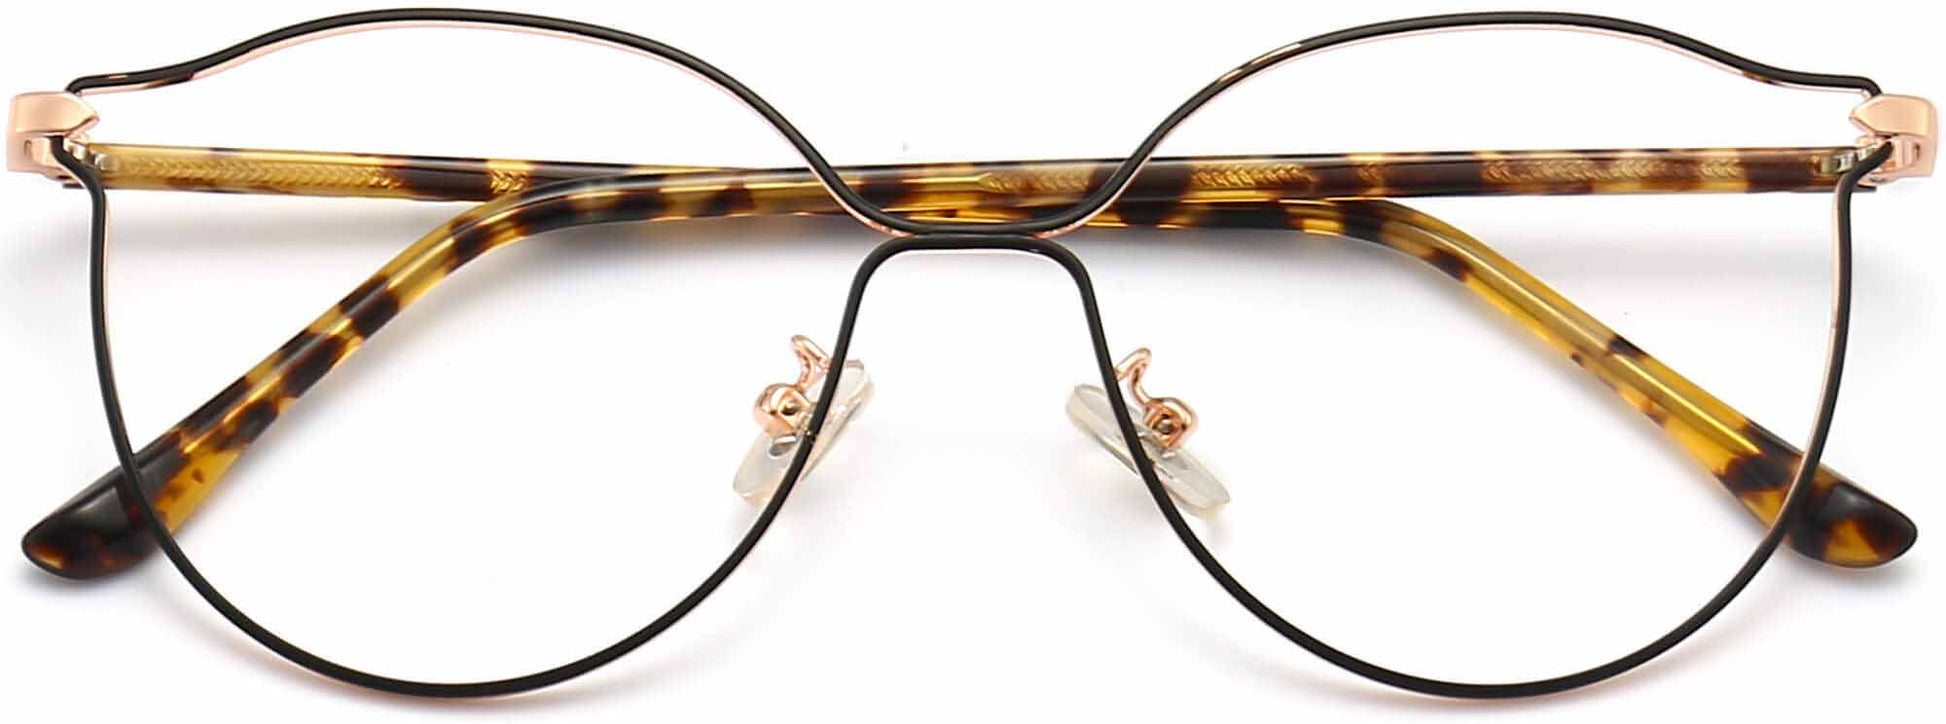 Ryleigh Cateye Black Eyeglasses from ANRRI, closed view